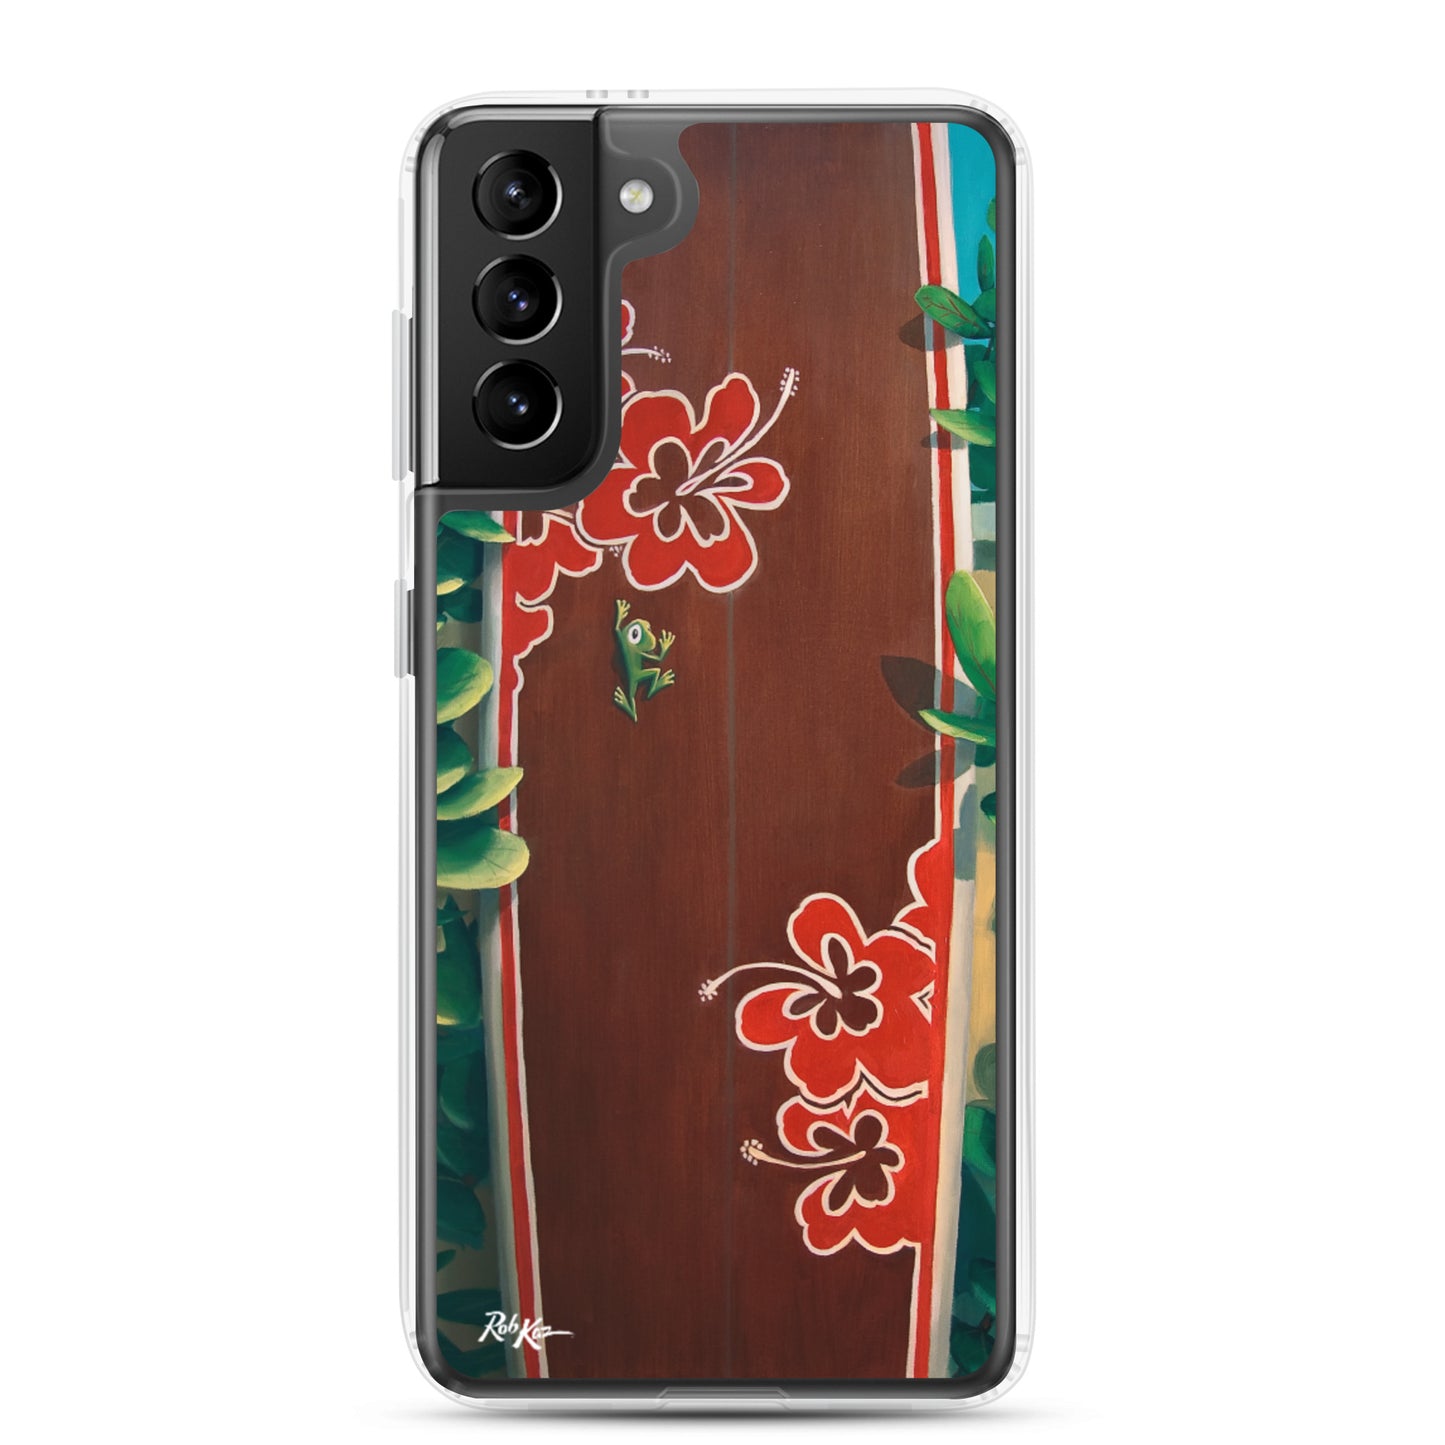 Samsung Case featuring Hang Loose by Rob Kaz